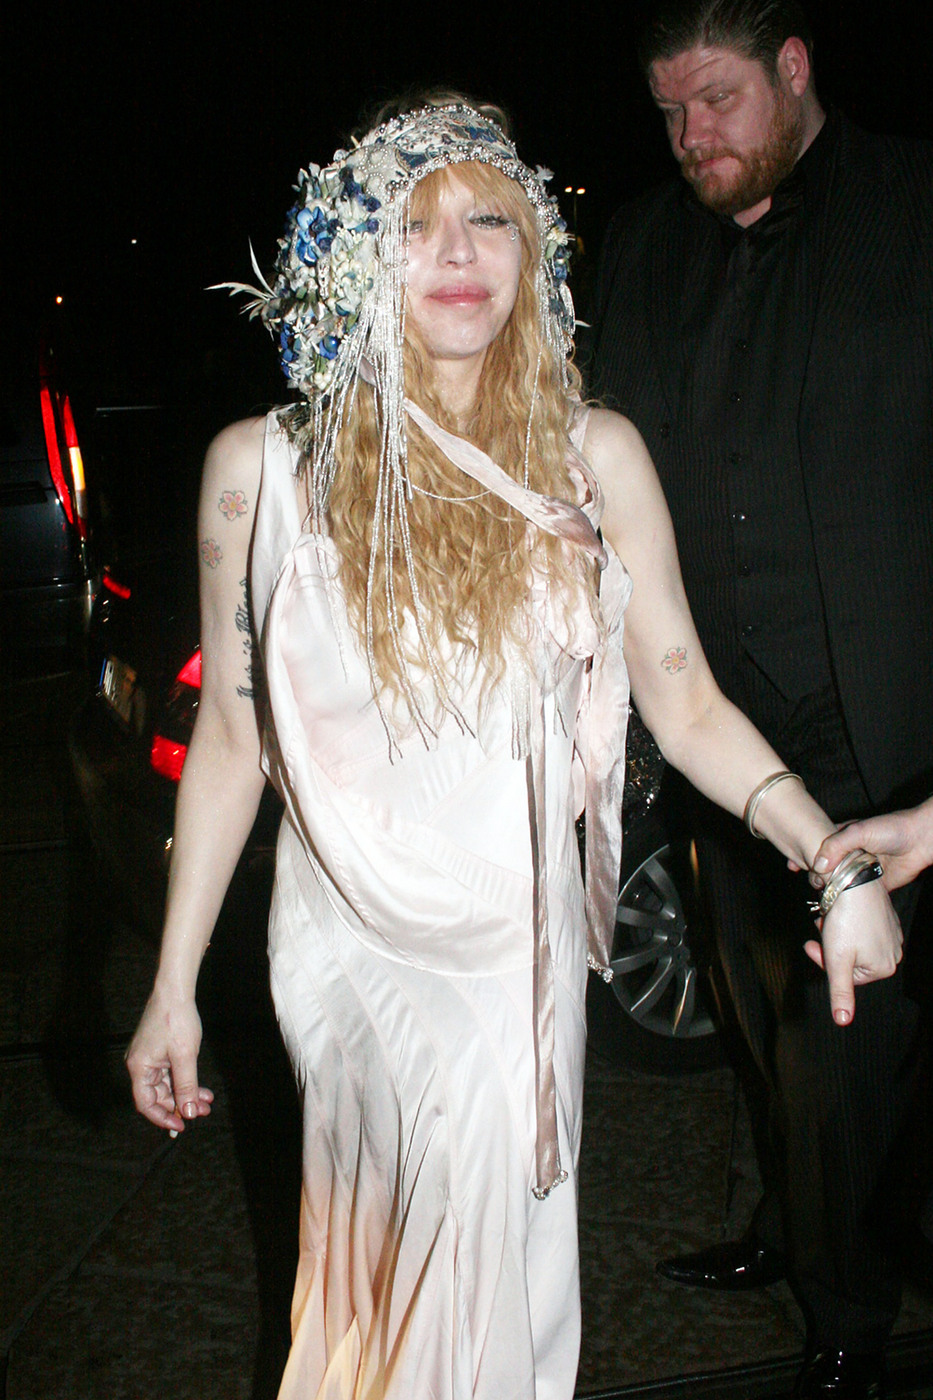 Courtney Love, wearing a long, flowing dress, takes part in the excitement surrounding Milan's Fashion Week